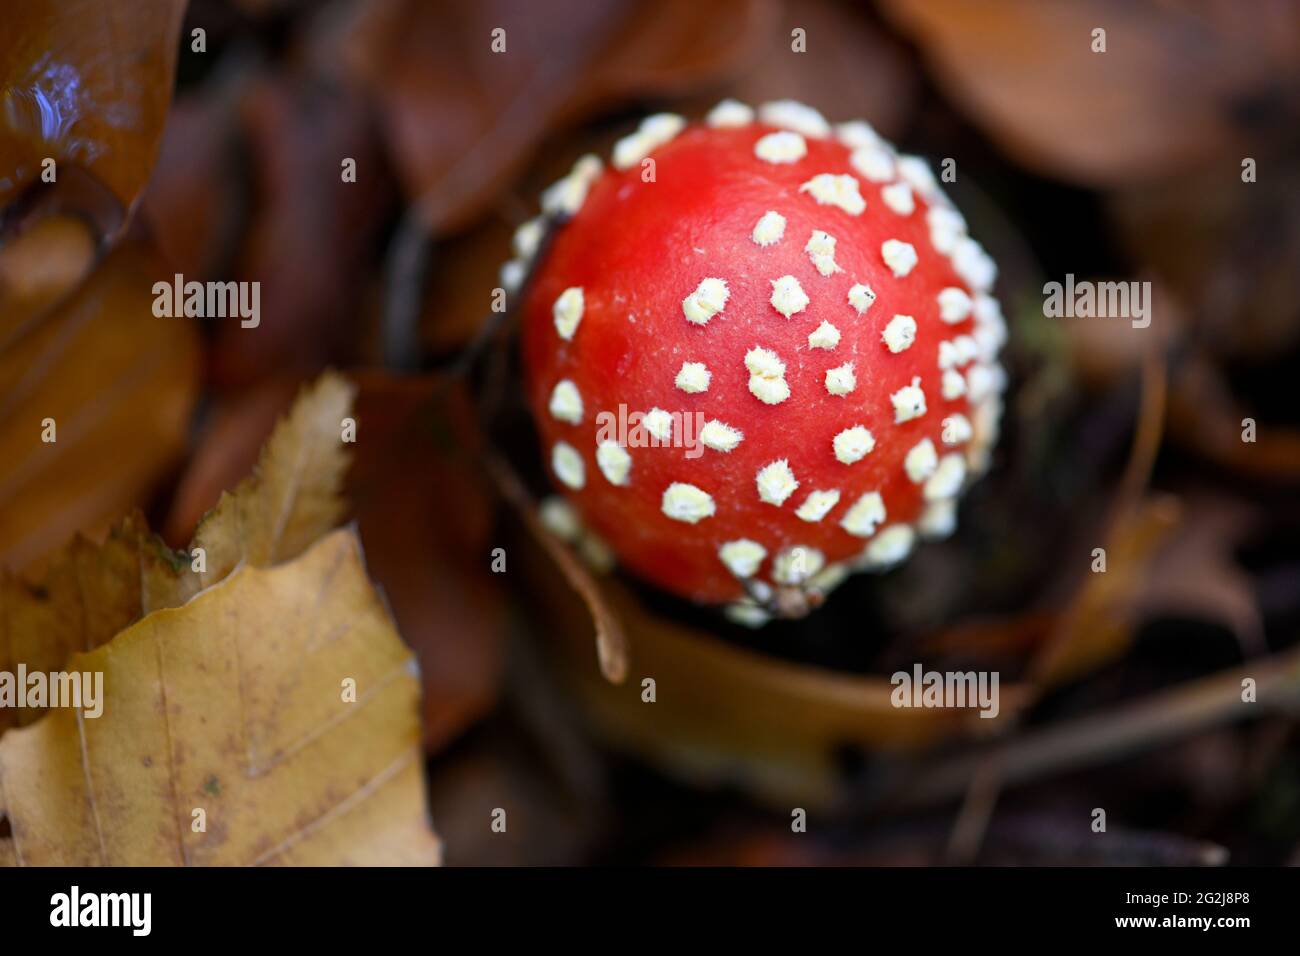 Fly agaric (Amanita muscaria) a type of mushroom in the amanita family, poisonous. Stock Photo